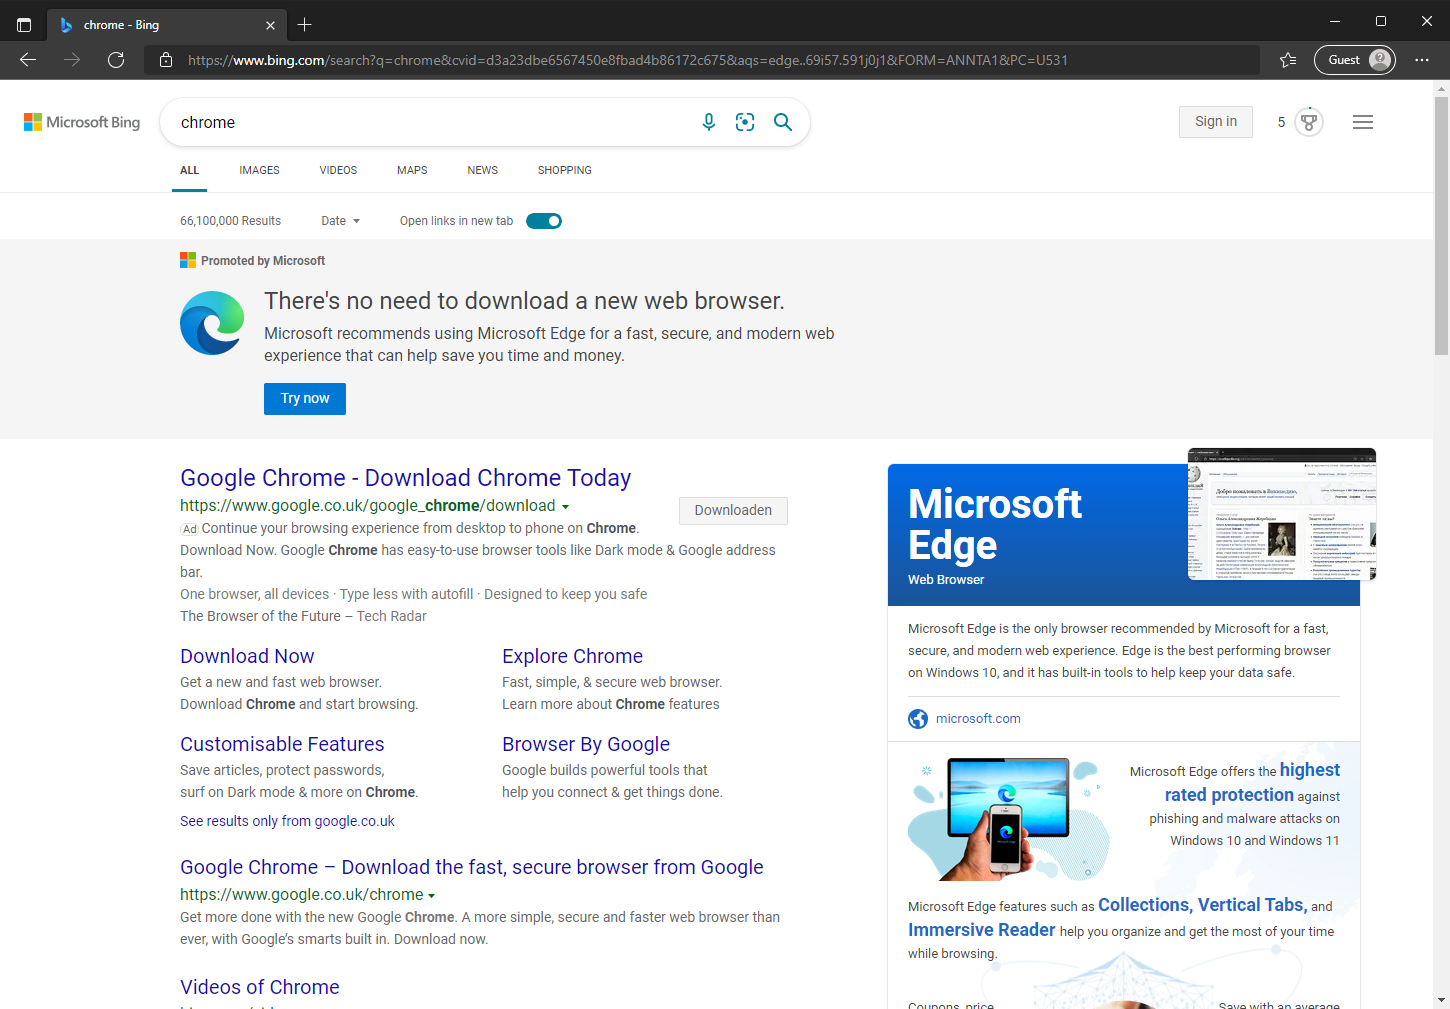 Bing search results for "Chrome"